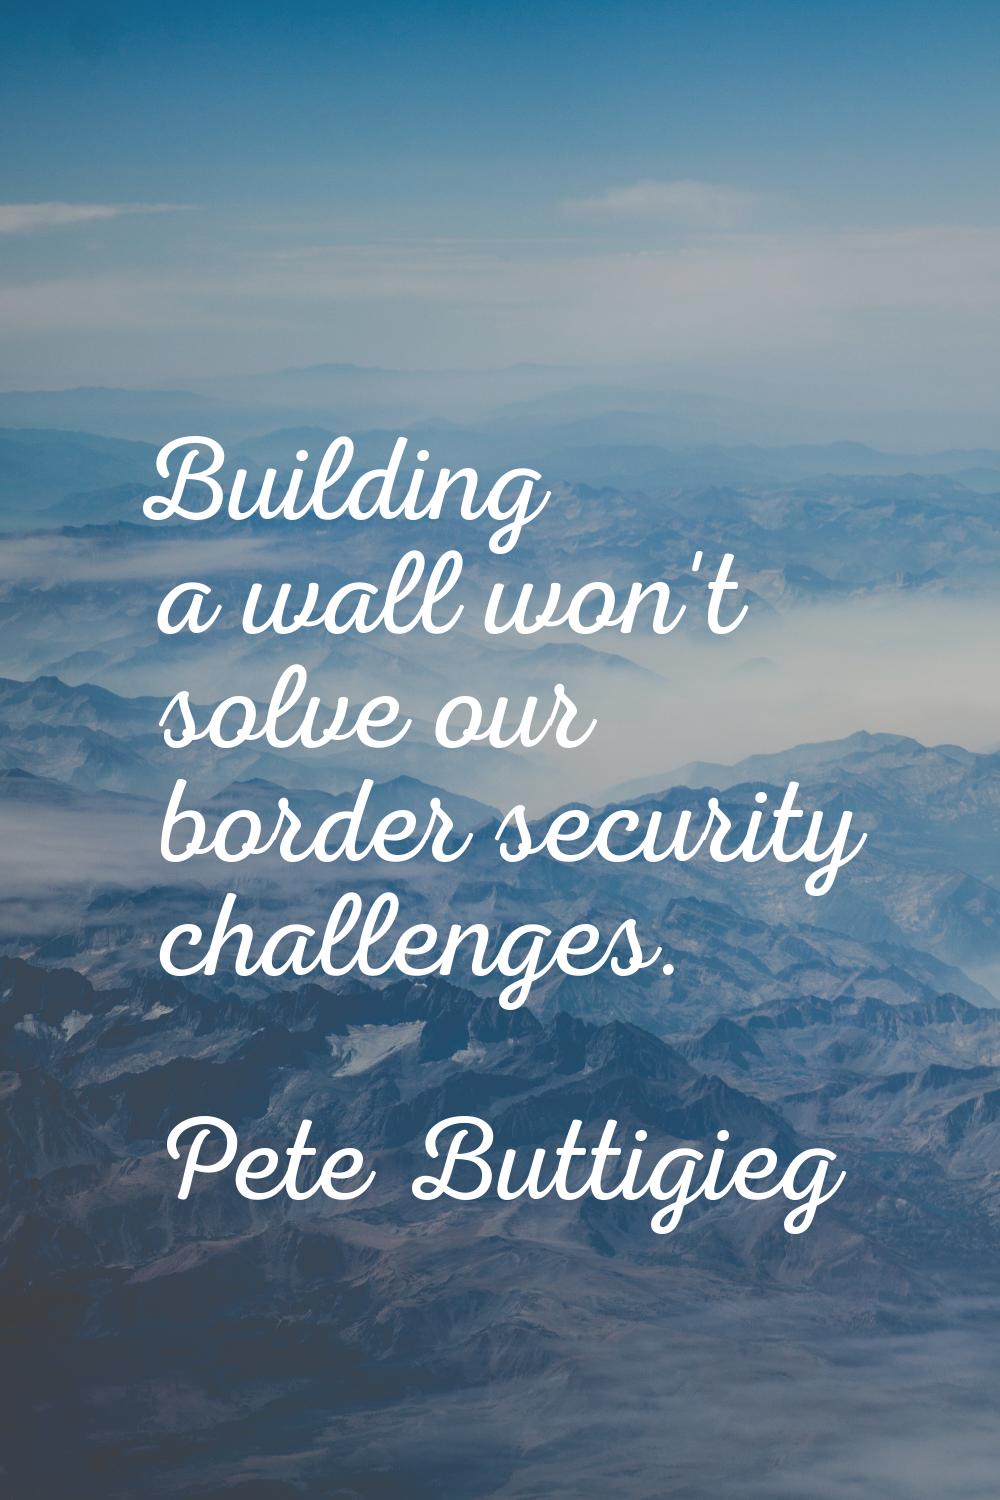 Building a wall won't solve our border security challenges.